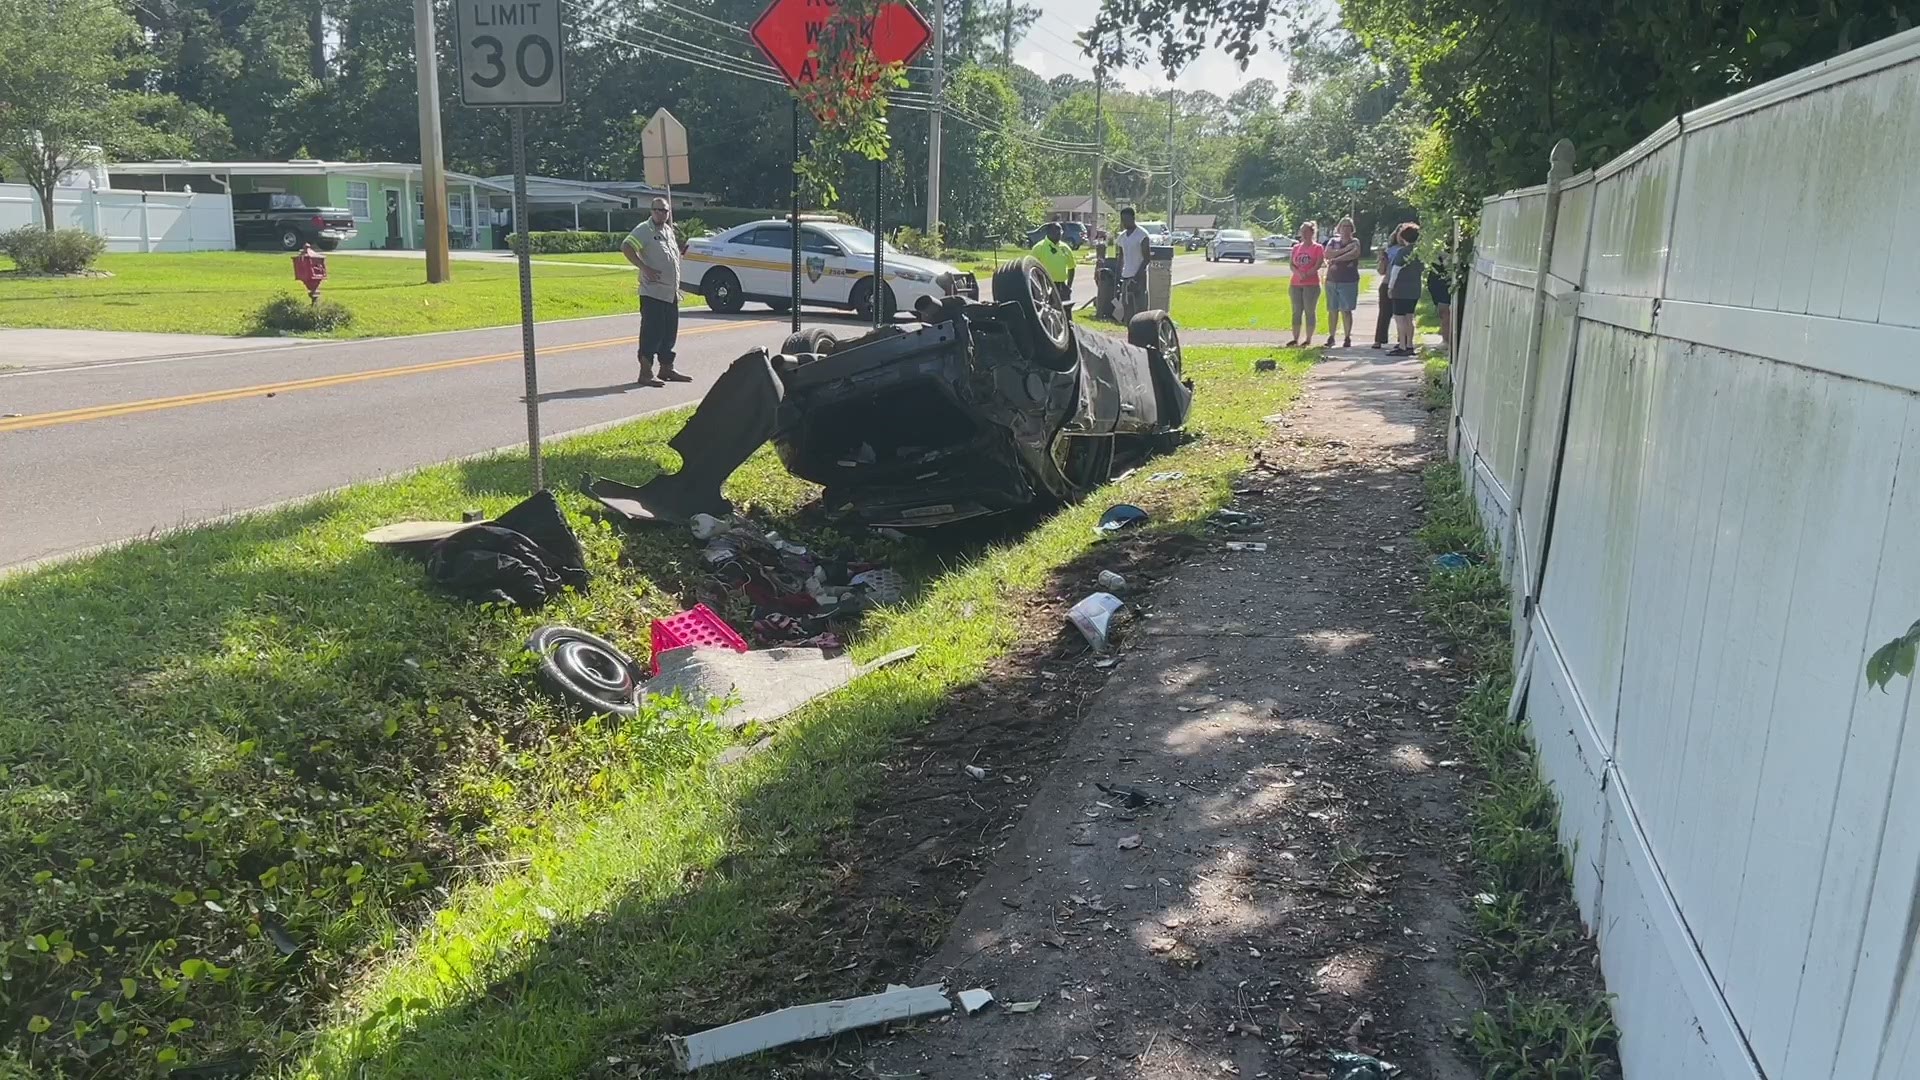 The crash happened in the 7100 block of Wiley Road, according to the Jacksonville Fire and Rescue Department.